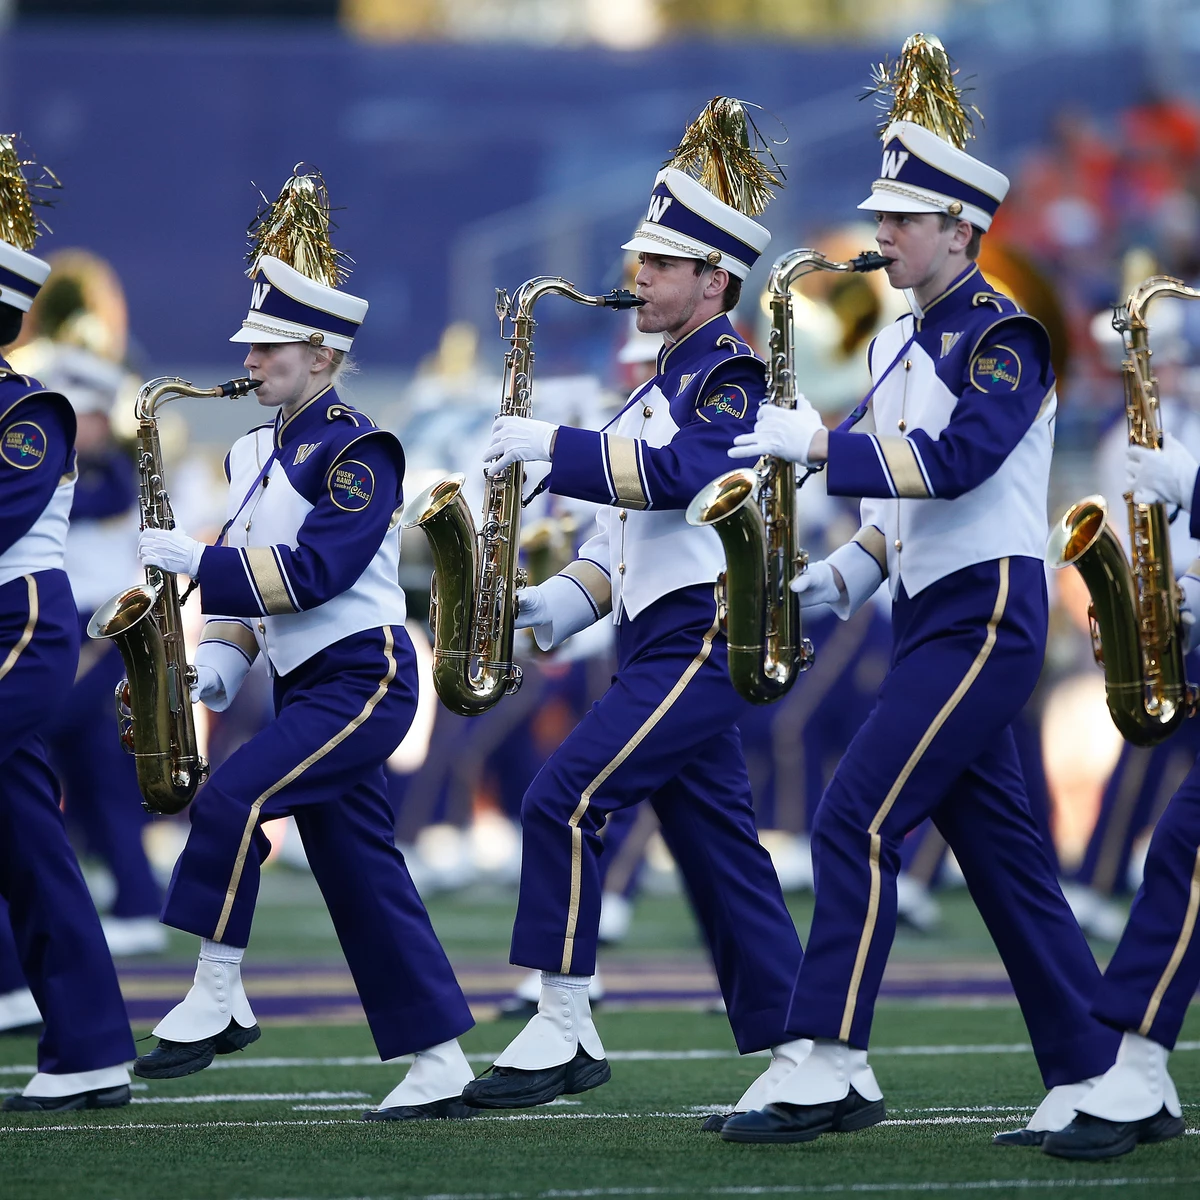 Vote For The Best East Texas High School Marching Band